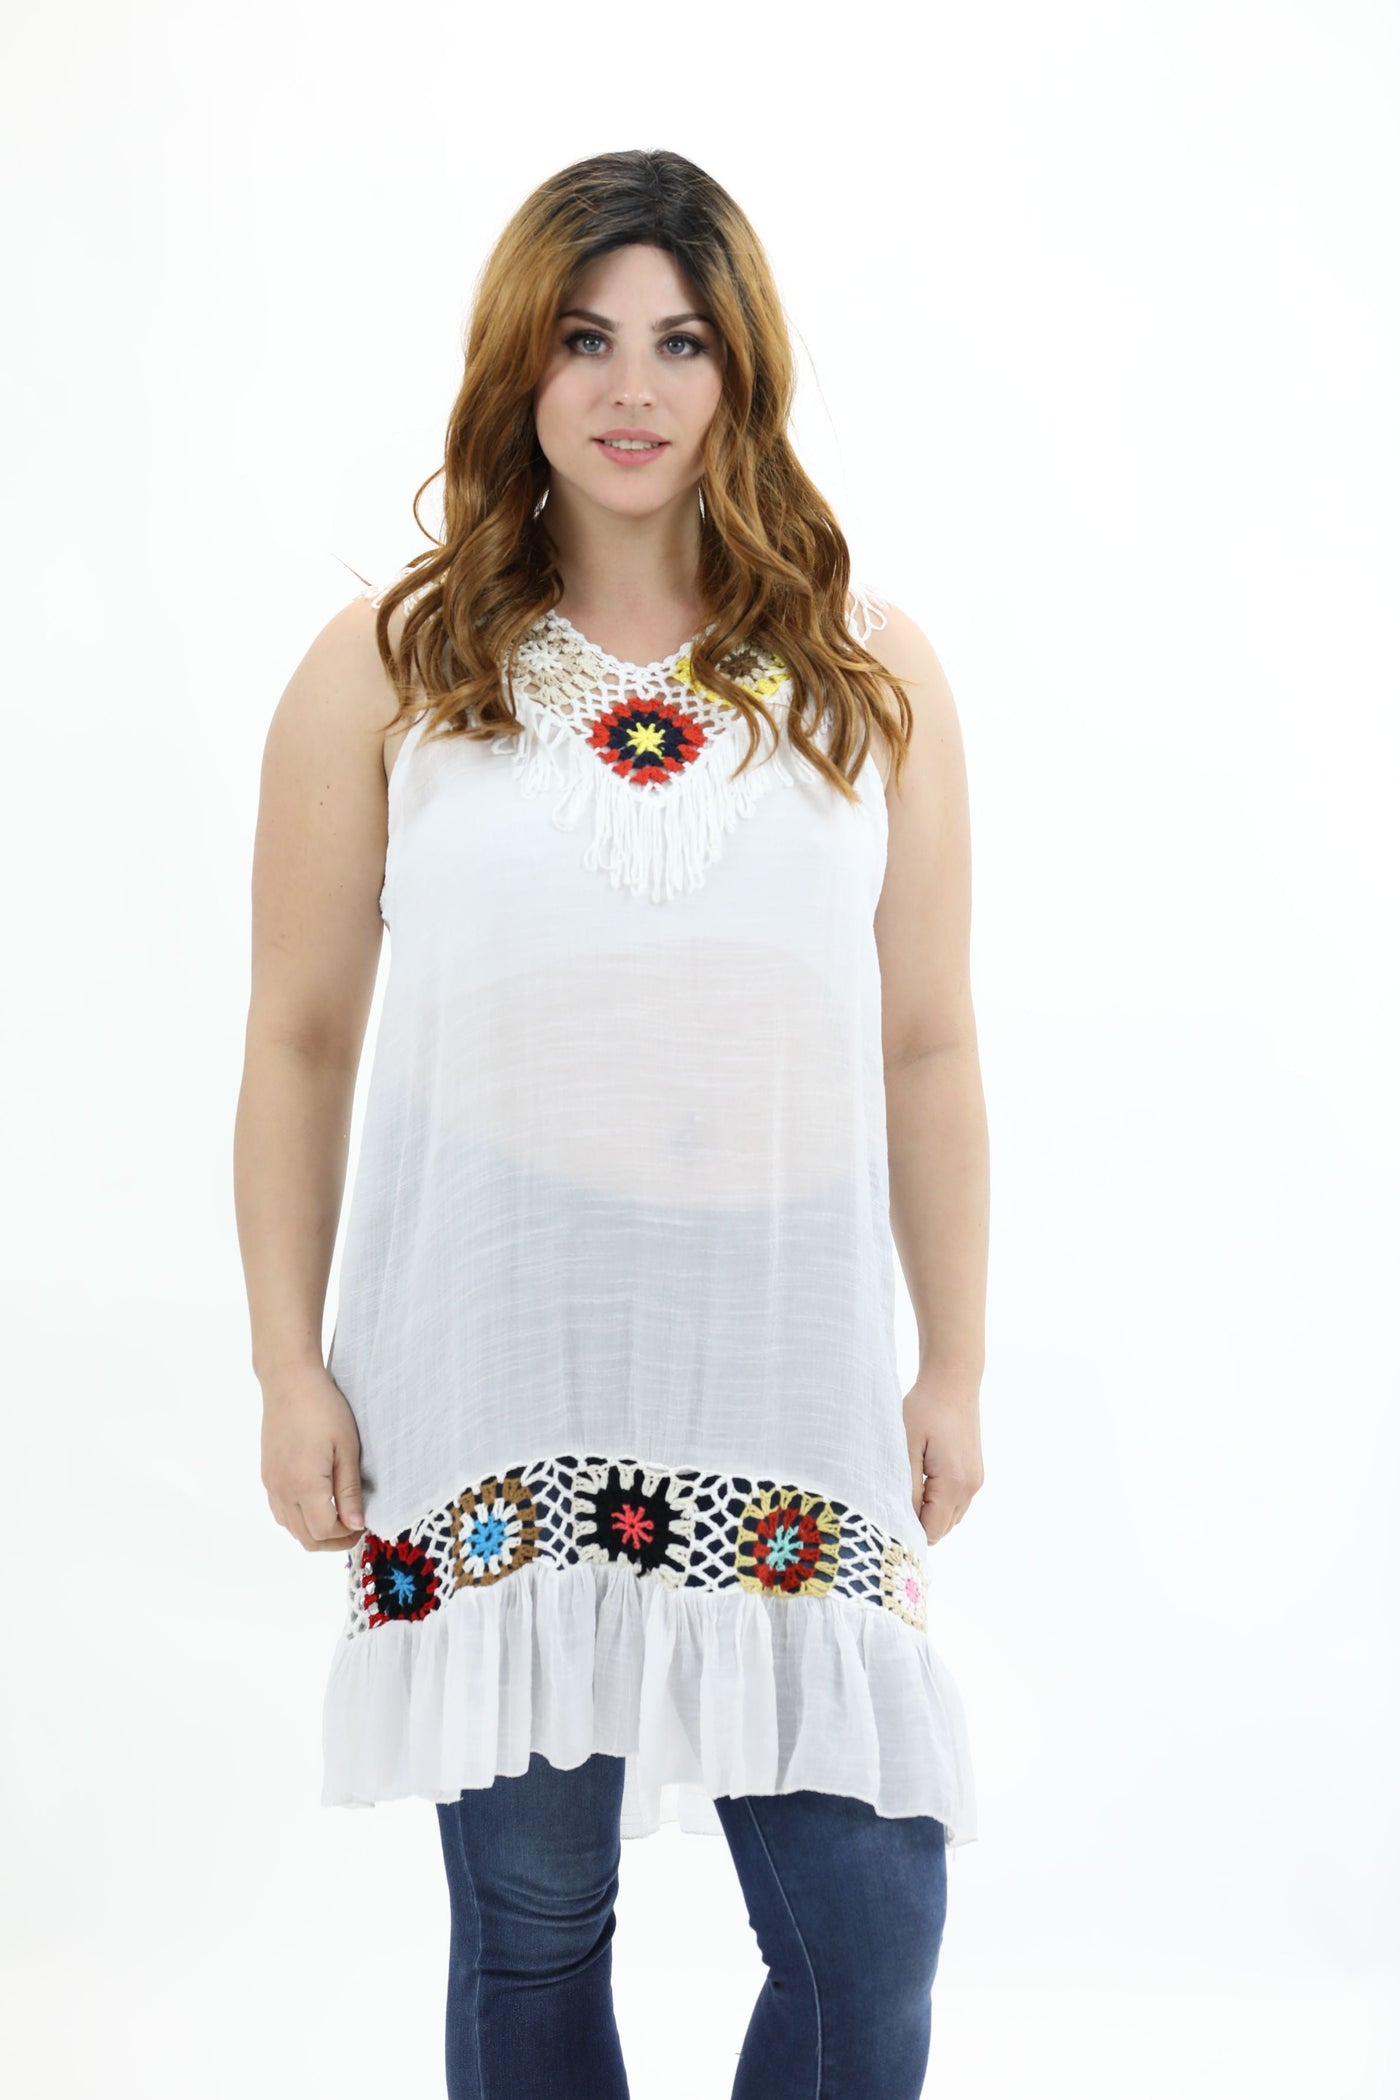 Sleeveless Colorful Crotchet Beach Cover-Up YD929 - Advance Apparels Inc